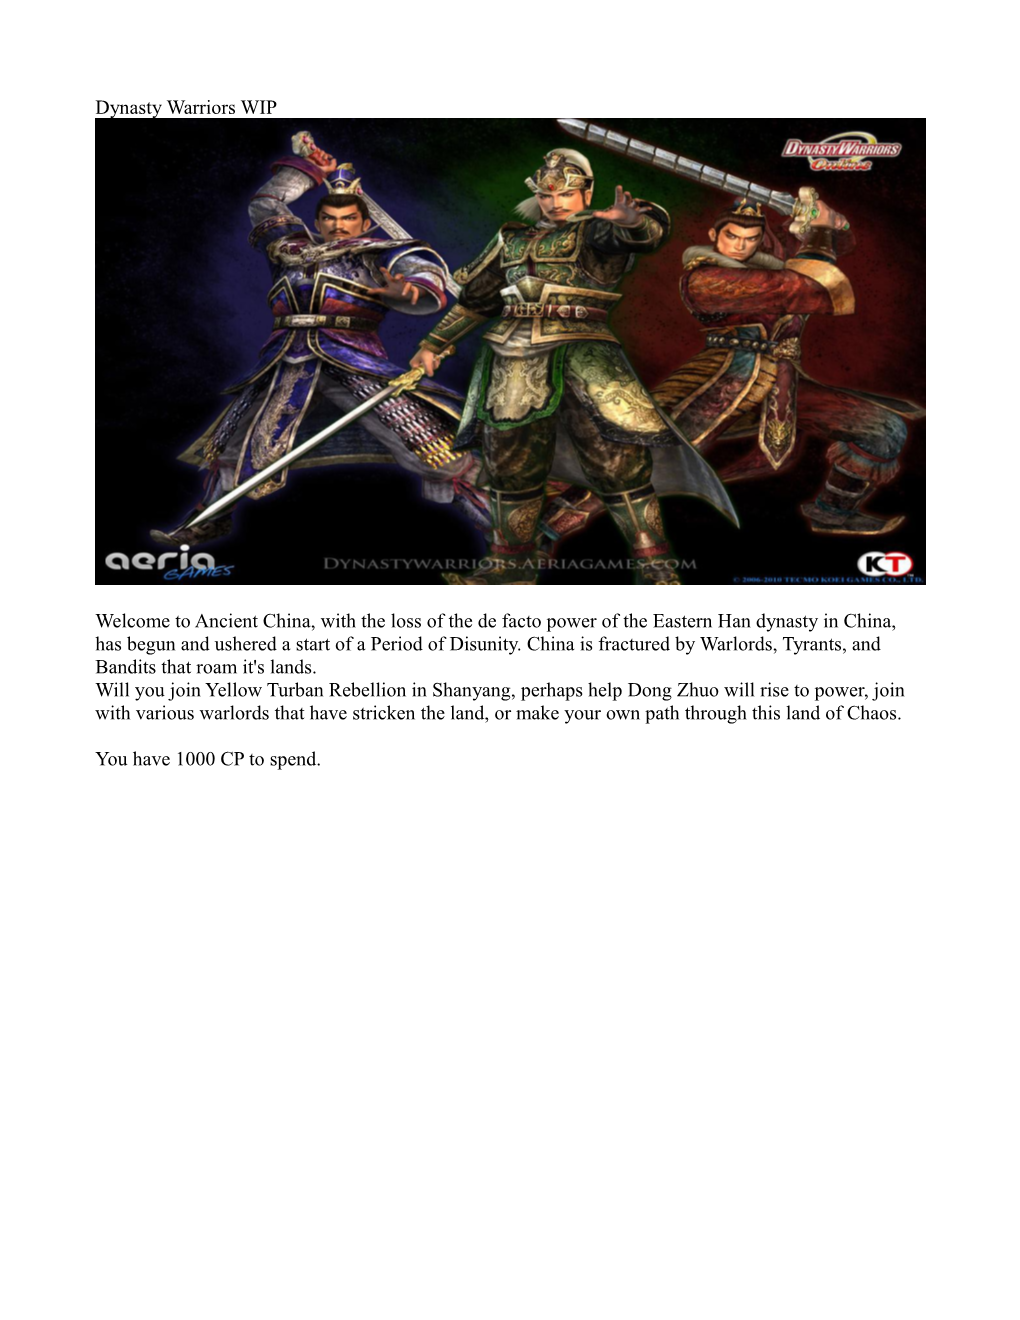 Dynasty Warriors WIP Welcome to Ancient China, with the Loss of The